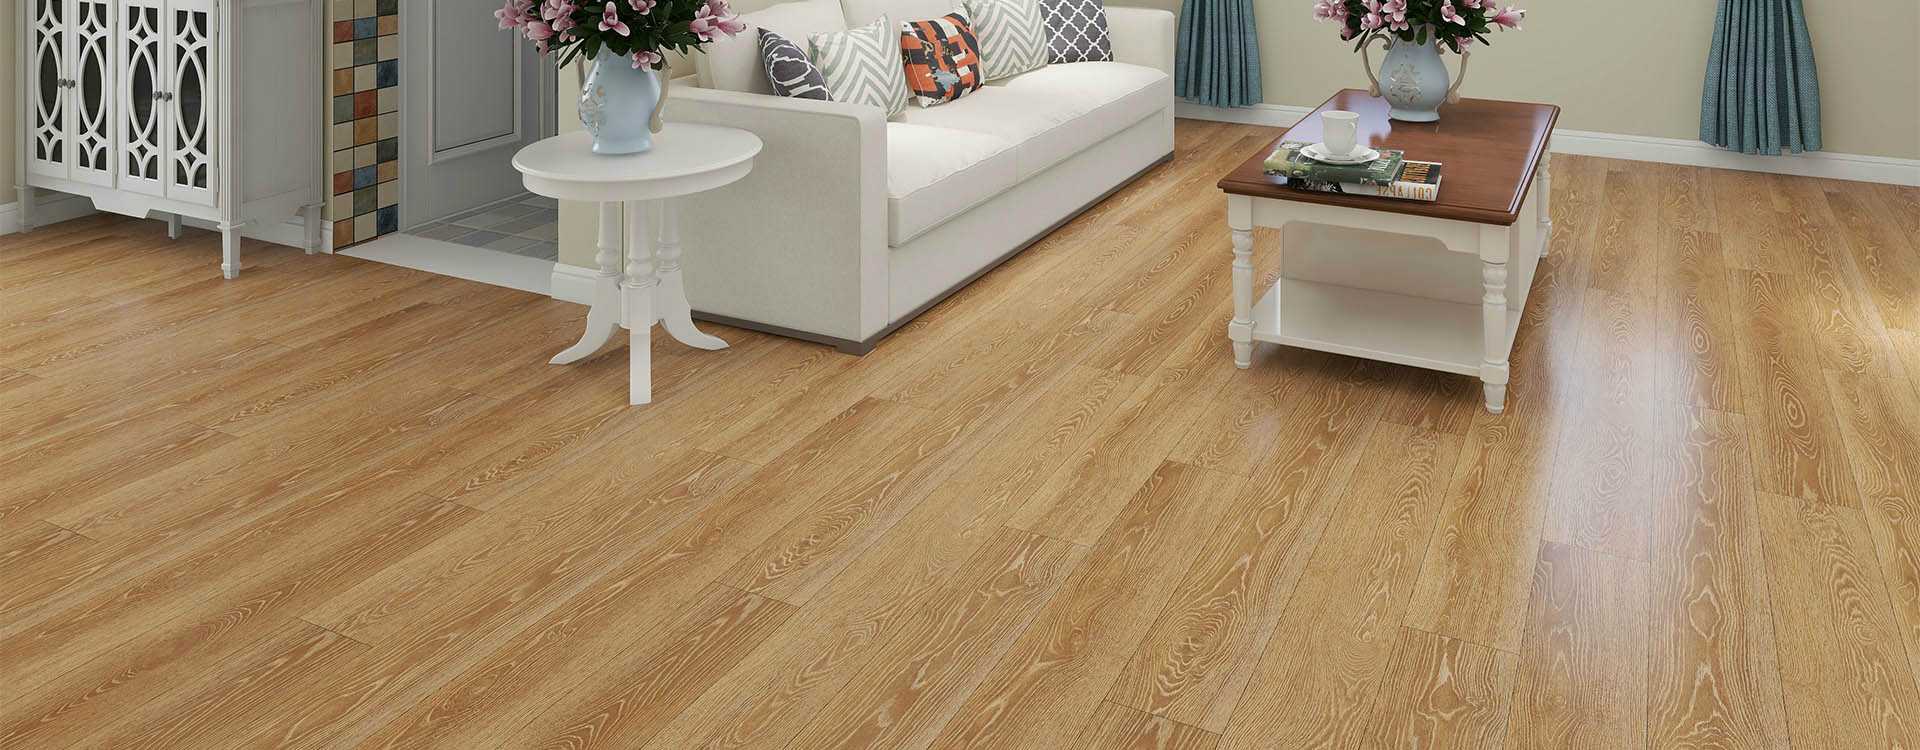 The difference between lvt patterned flooring, WPC flooring, and SPC flooring